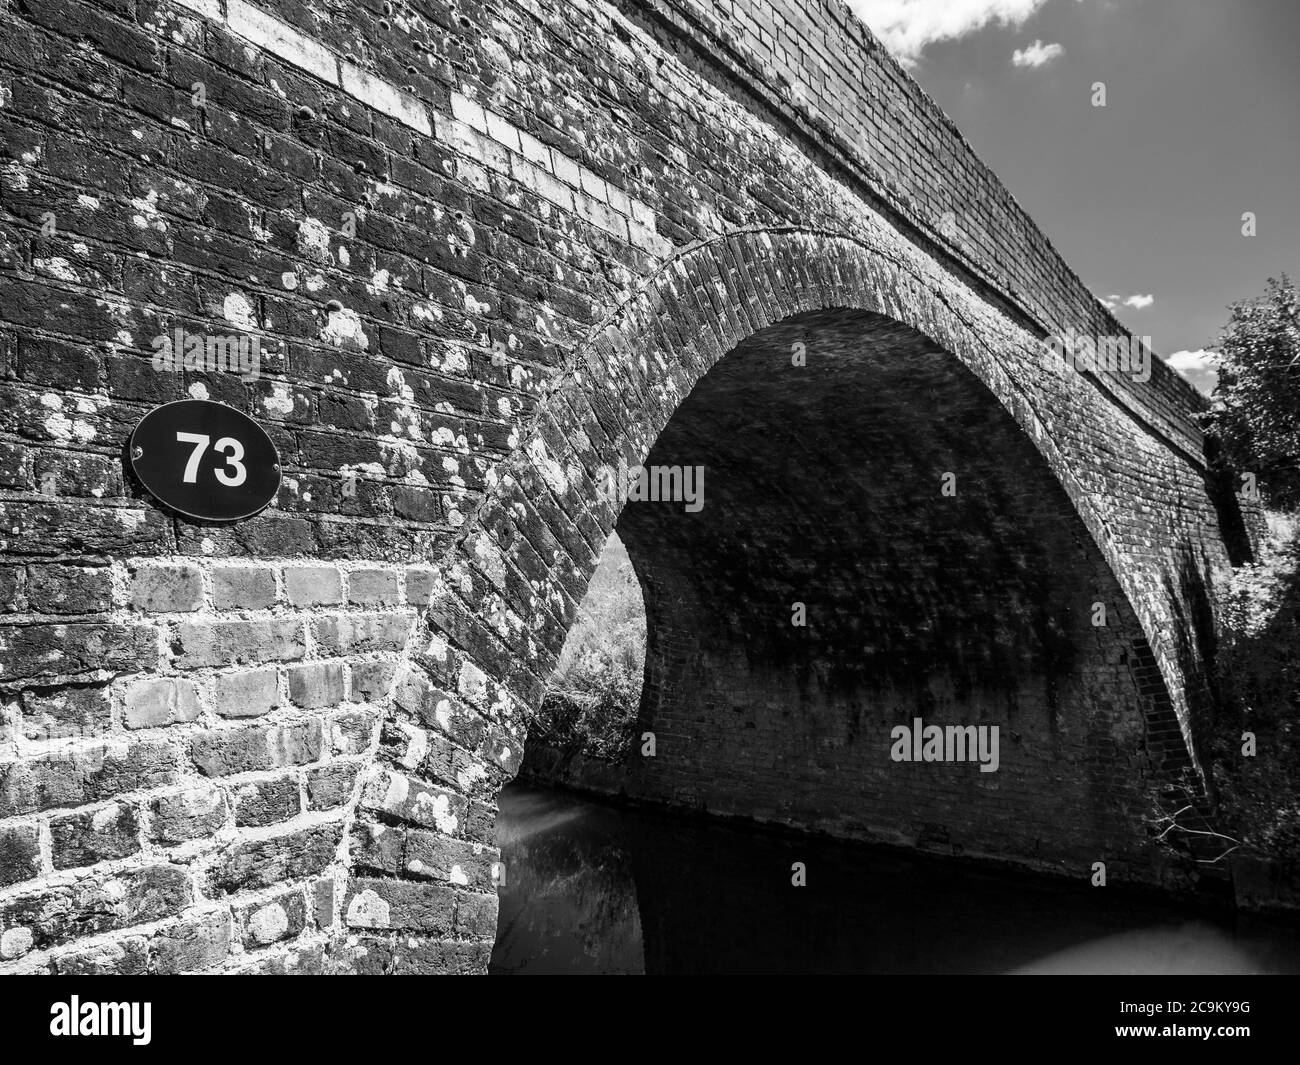 Black and White Landscape of Shepards Bridge, No 73, Kennett and Avon Canal, nr Kintbury, Hungerford, Berkshire, Angleterre, Royaume-Uni, GB. Banque D'Images